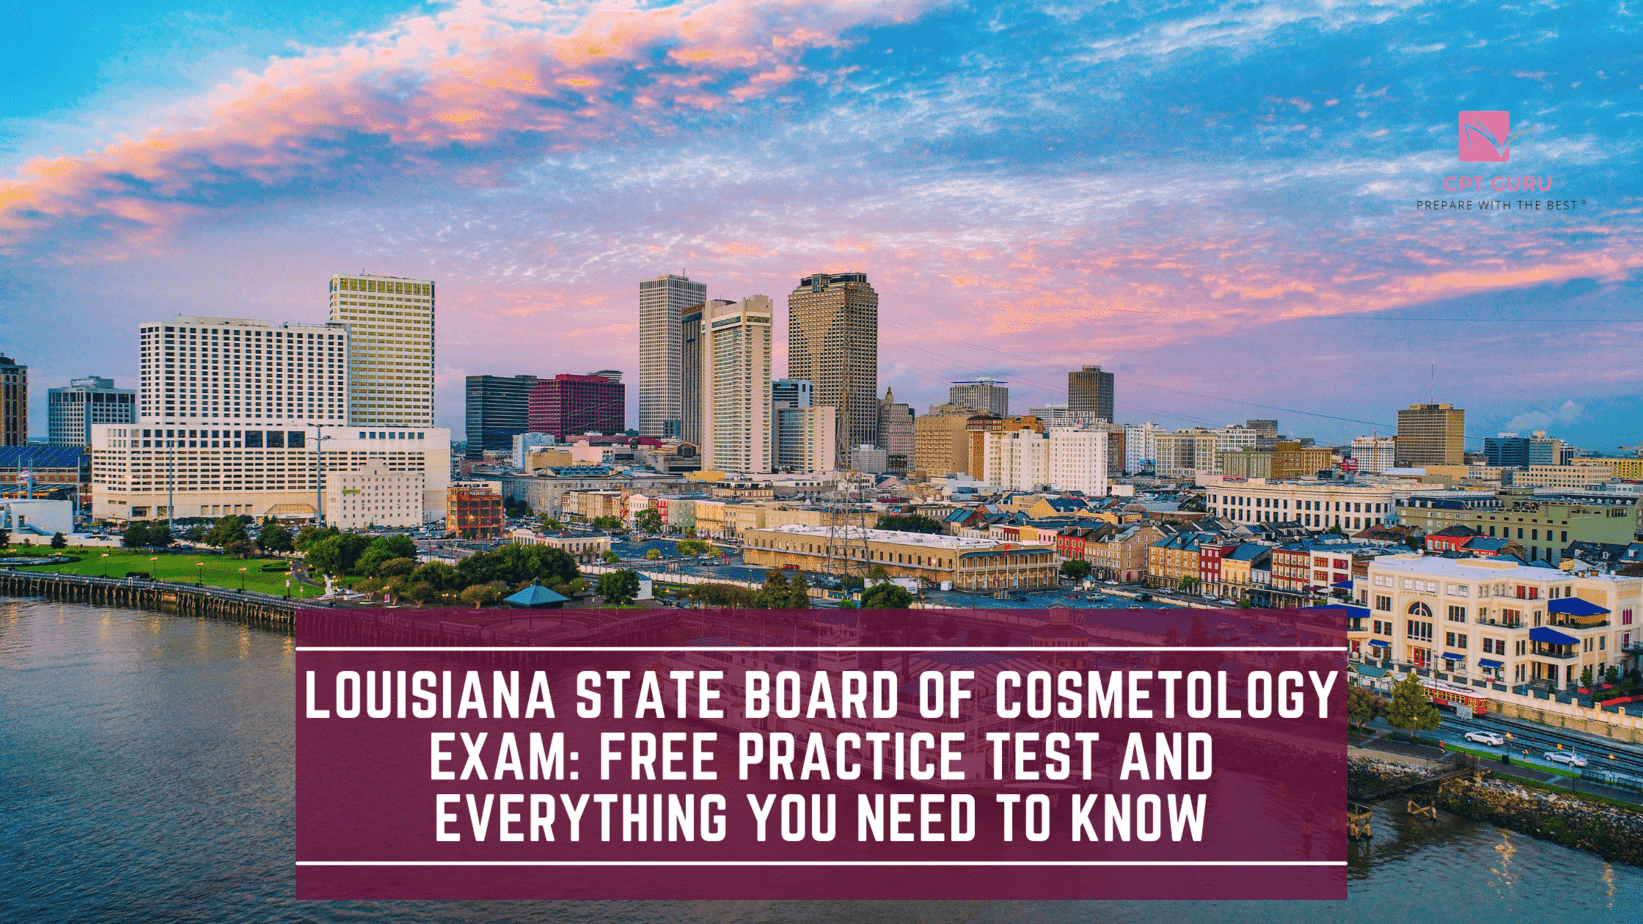 Louisiana State Board of Cosmetology Exam: Free Practice Test and Everything You Need to Know